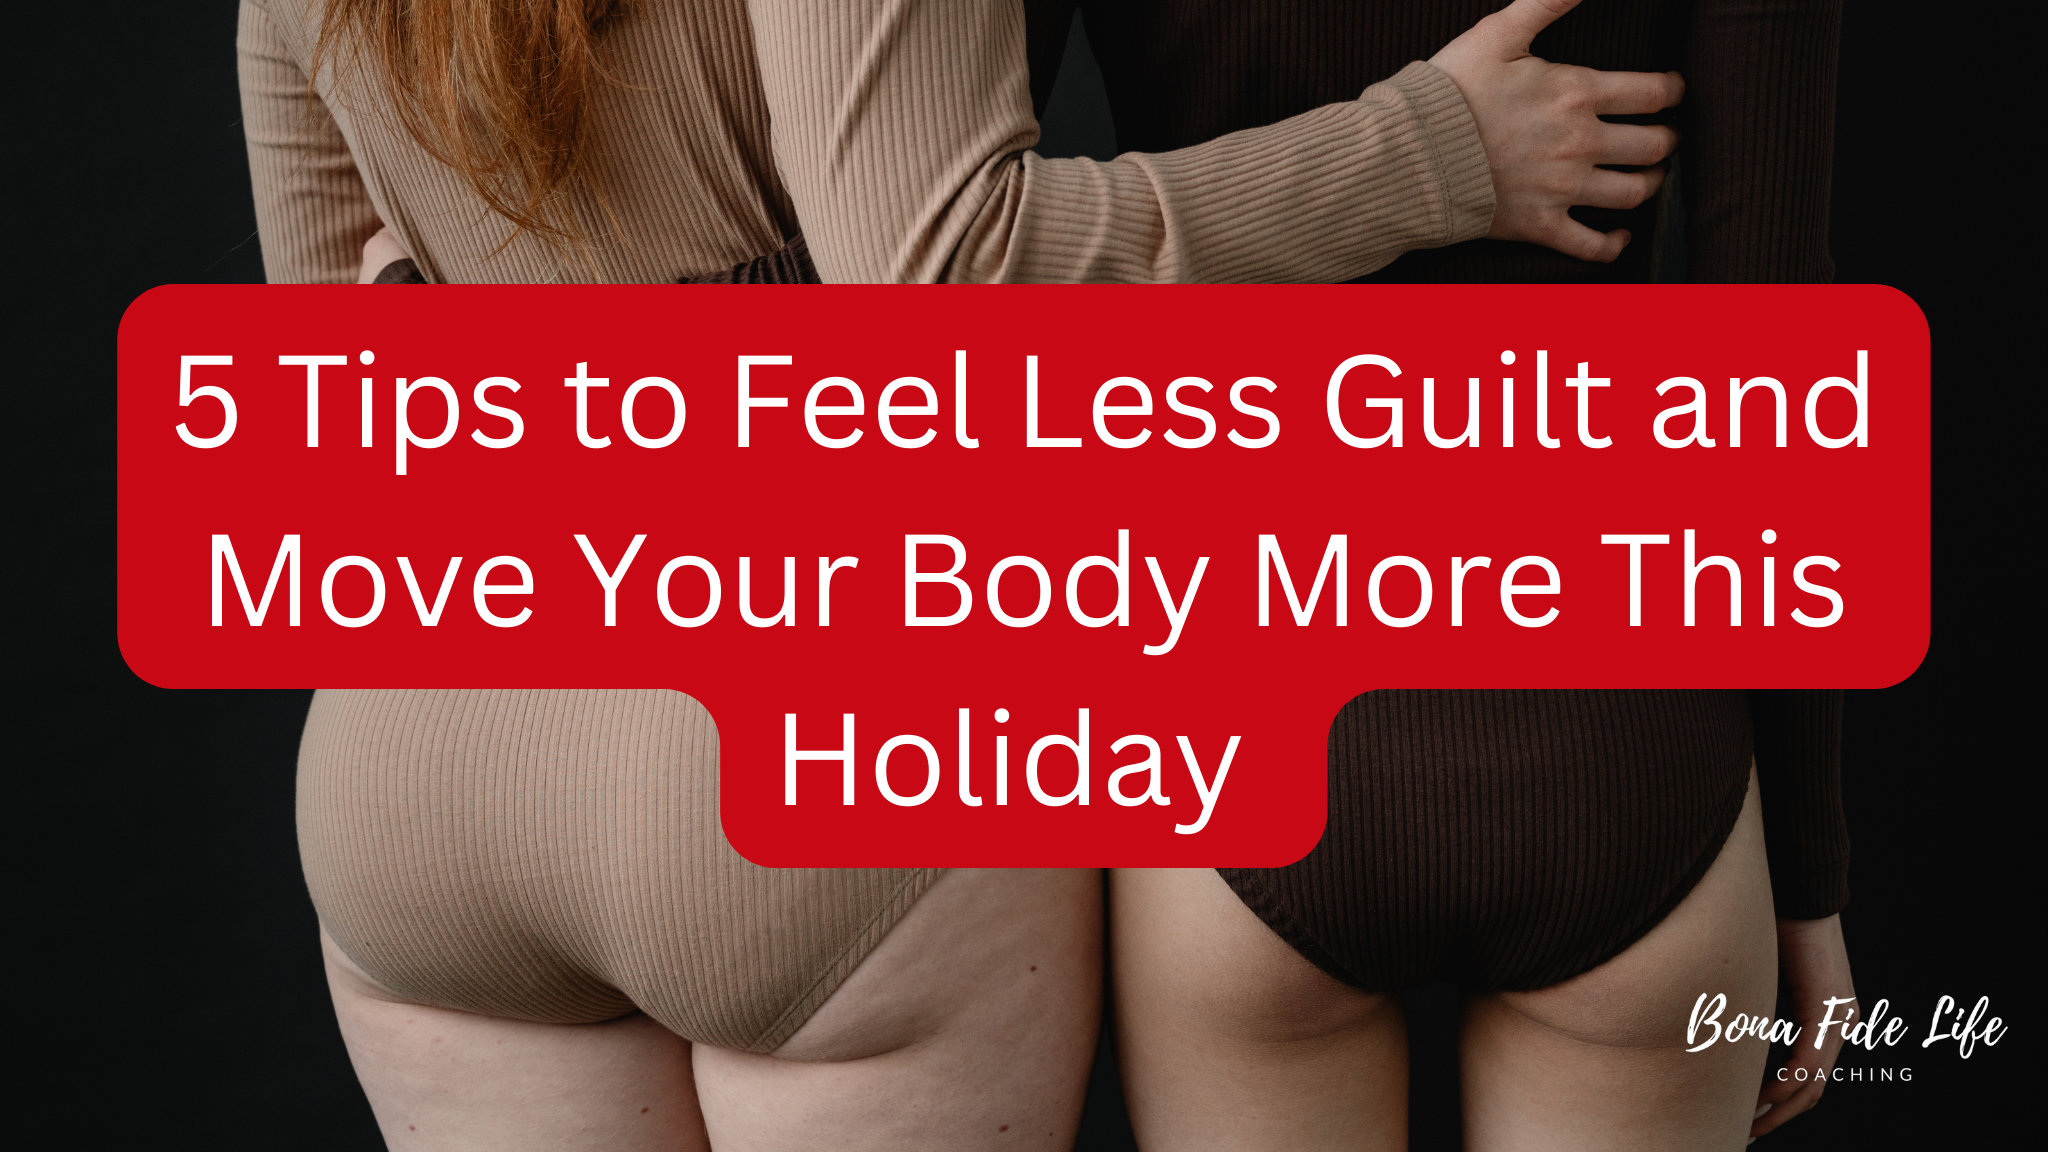 Two women in body suits with their backs to the camera, arms around each other. In the foreground reads, "5 Tips to Feel Less Guilt and Move Your Body More this Holiday"